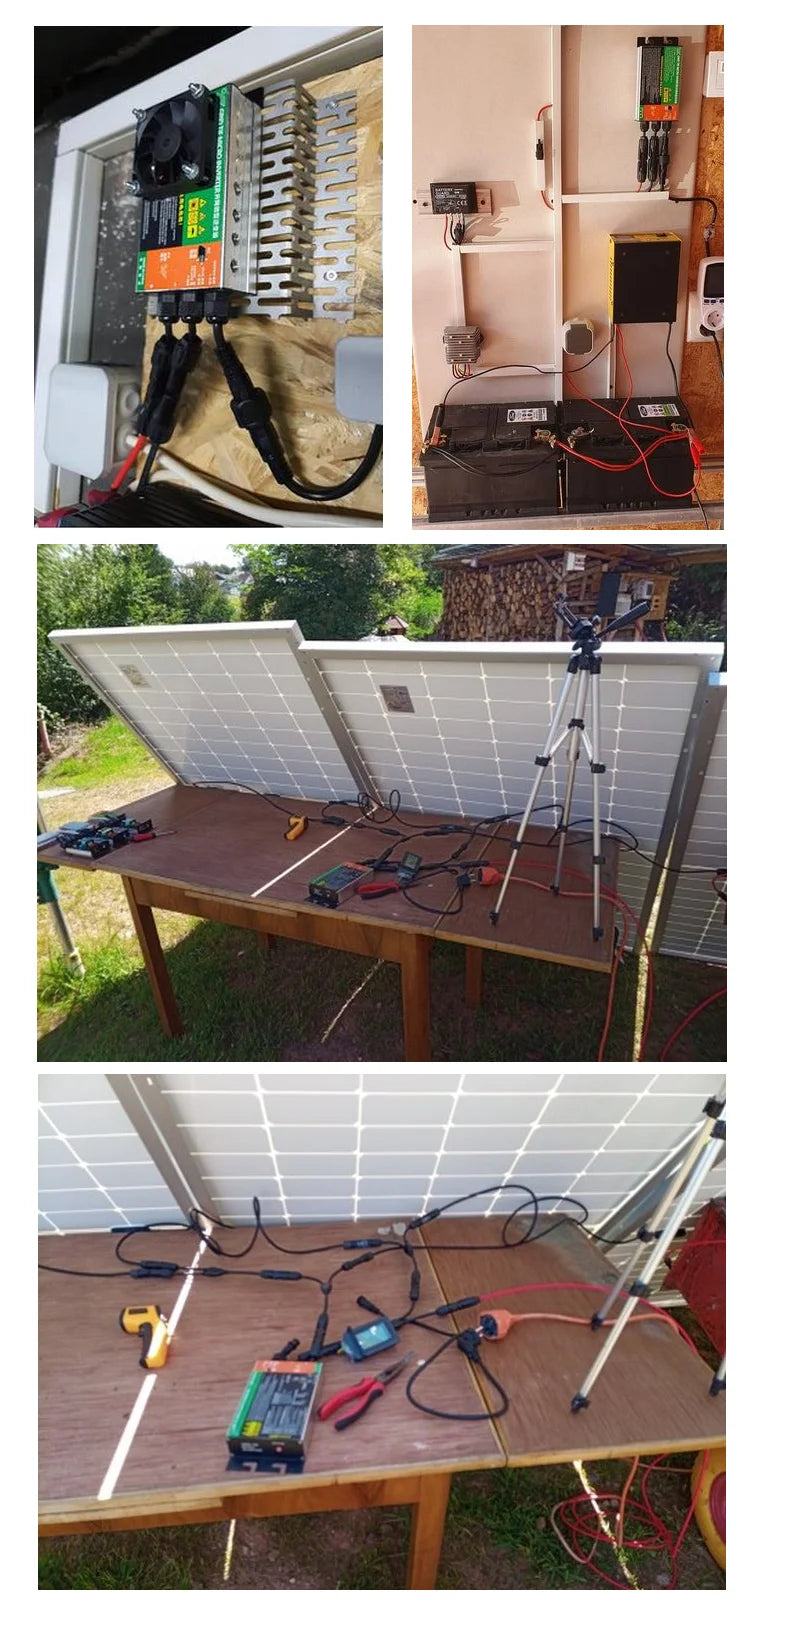 MPPT Solar Grid Tie Micro Inverter, Install away from direct sunlight and rain exposure to ensure optimal performance.